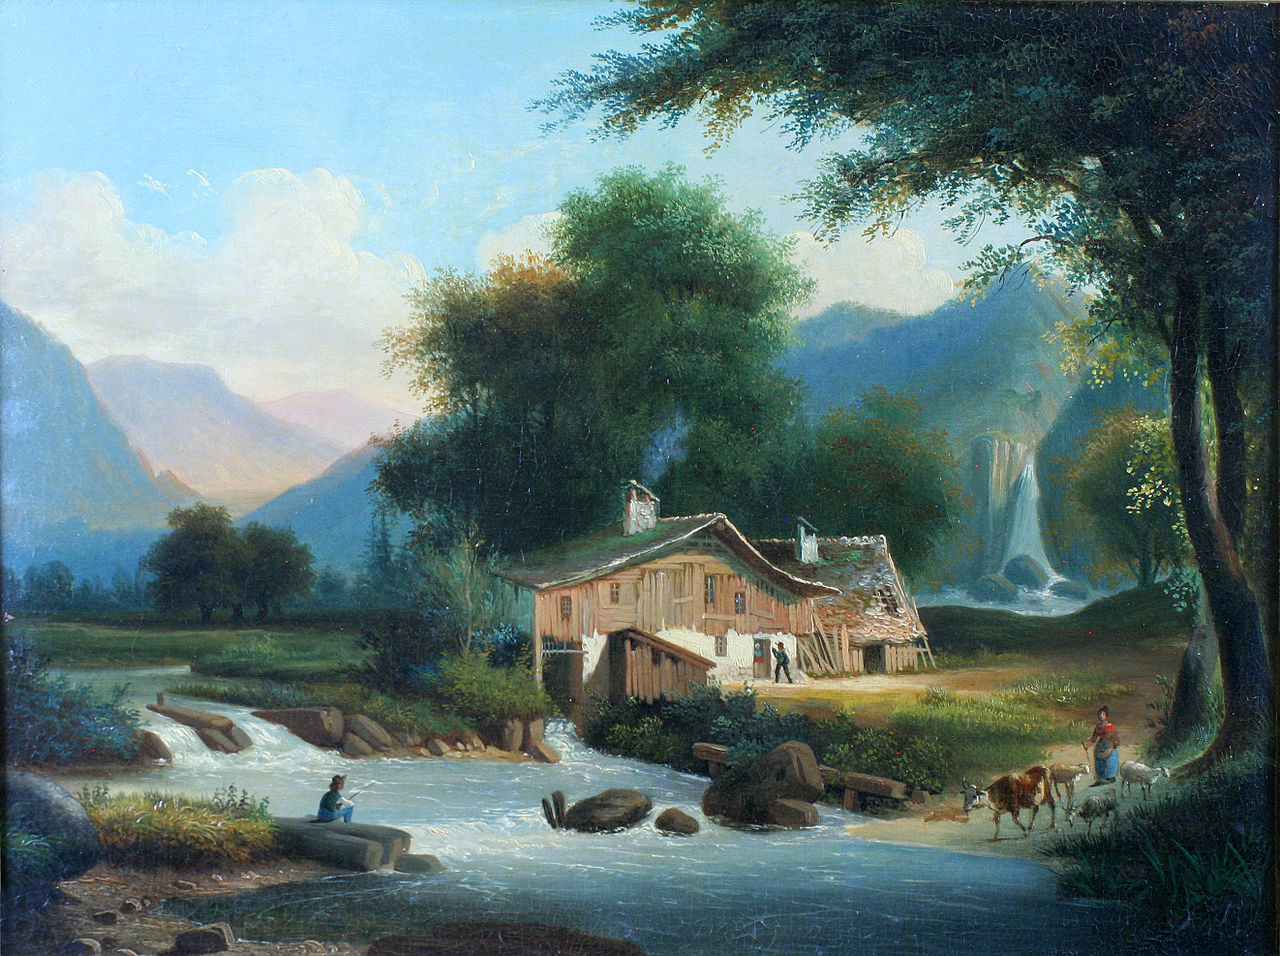 images/Cottage_and_Stream.jpg